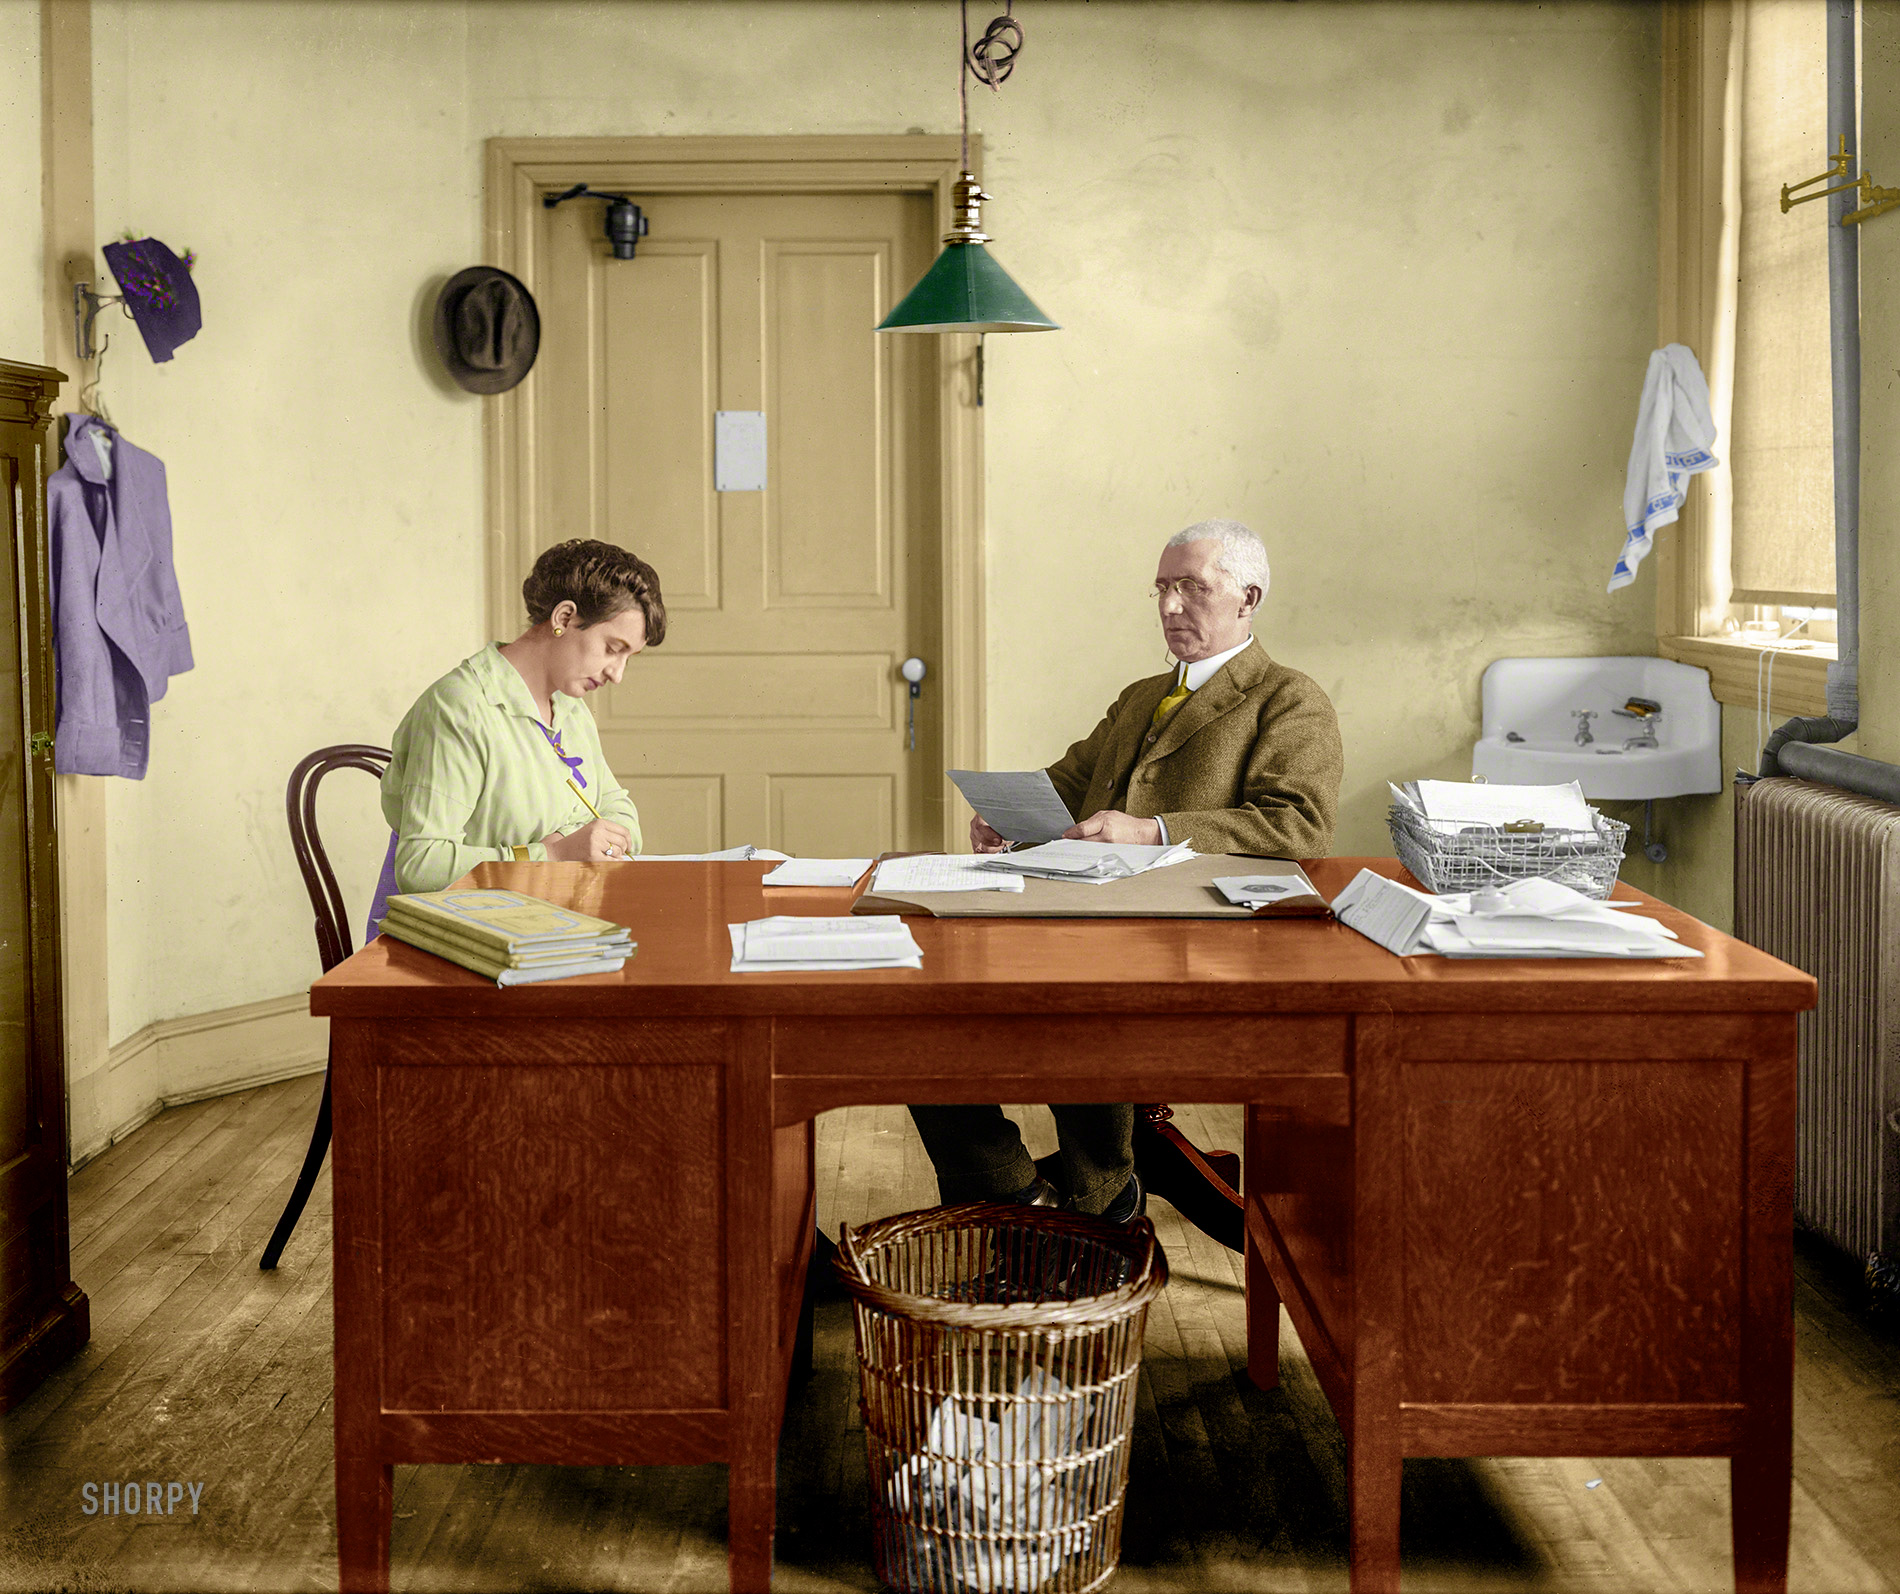 Colorized from this Shorpy original. I love this image. Almost like a play, it spoke to me. The scene is set just like a play. View full size.